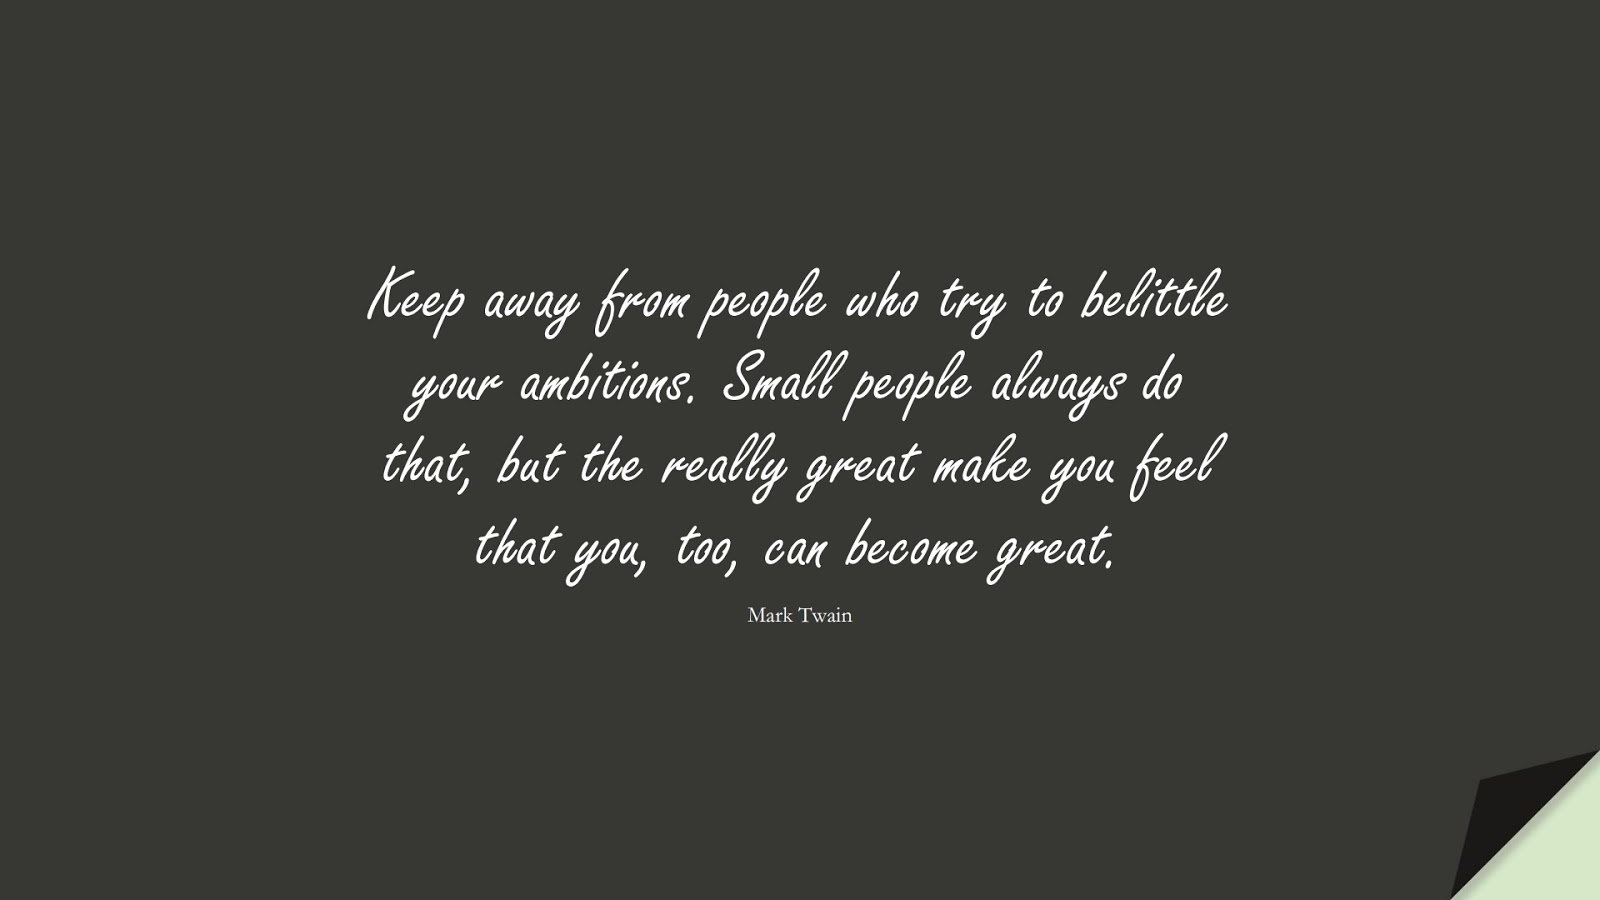 Keep away from people who try to belittle your ambitions. Small people always do that, but the really great make you feel that you, too, can become great. (Mark Twain);  #ChangeQuotes